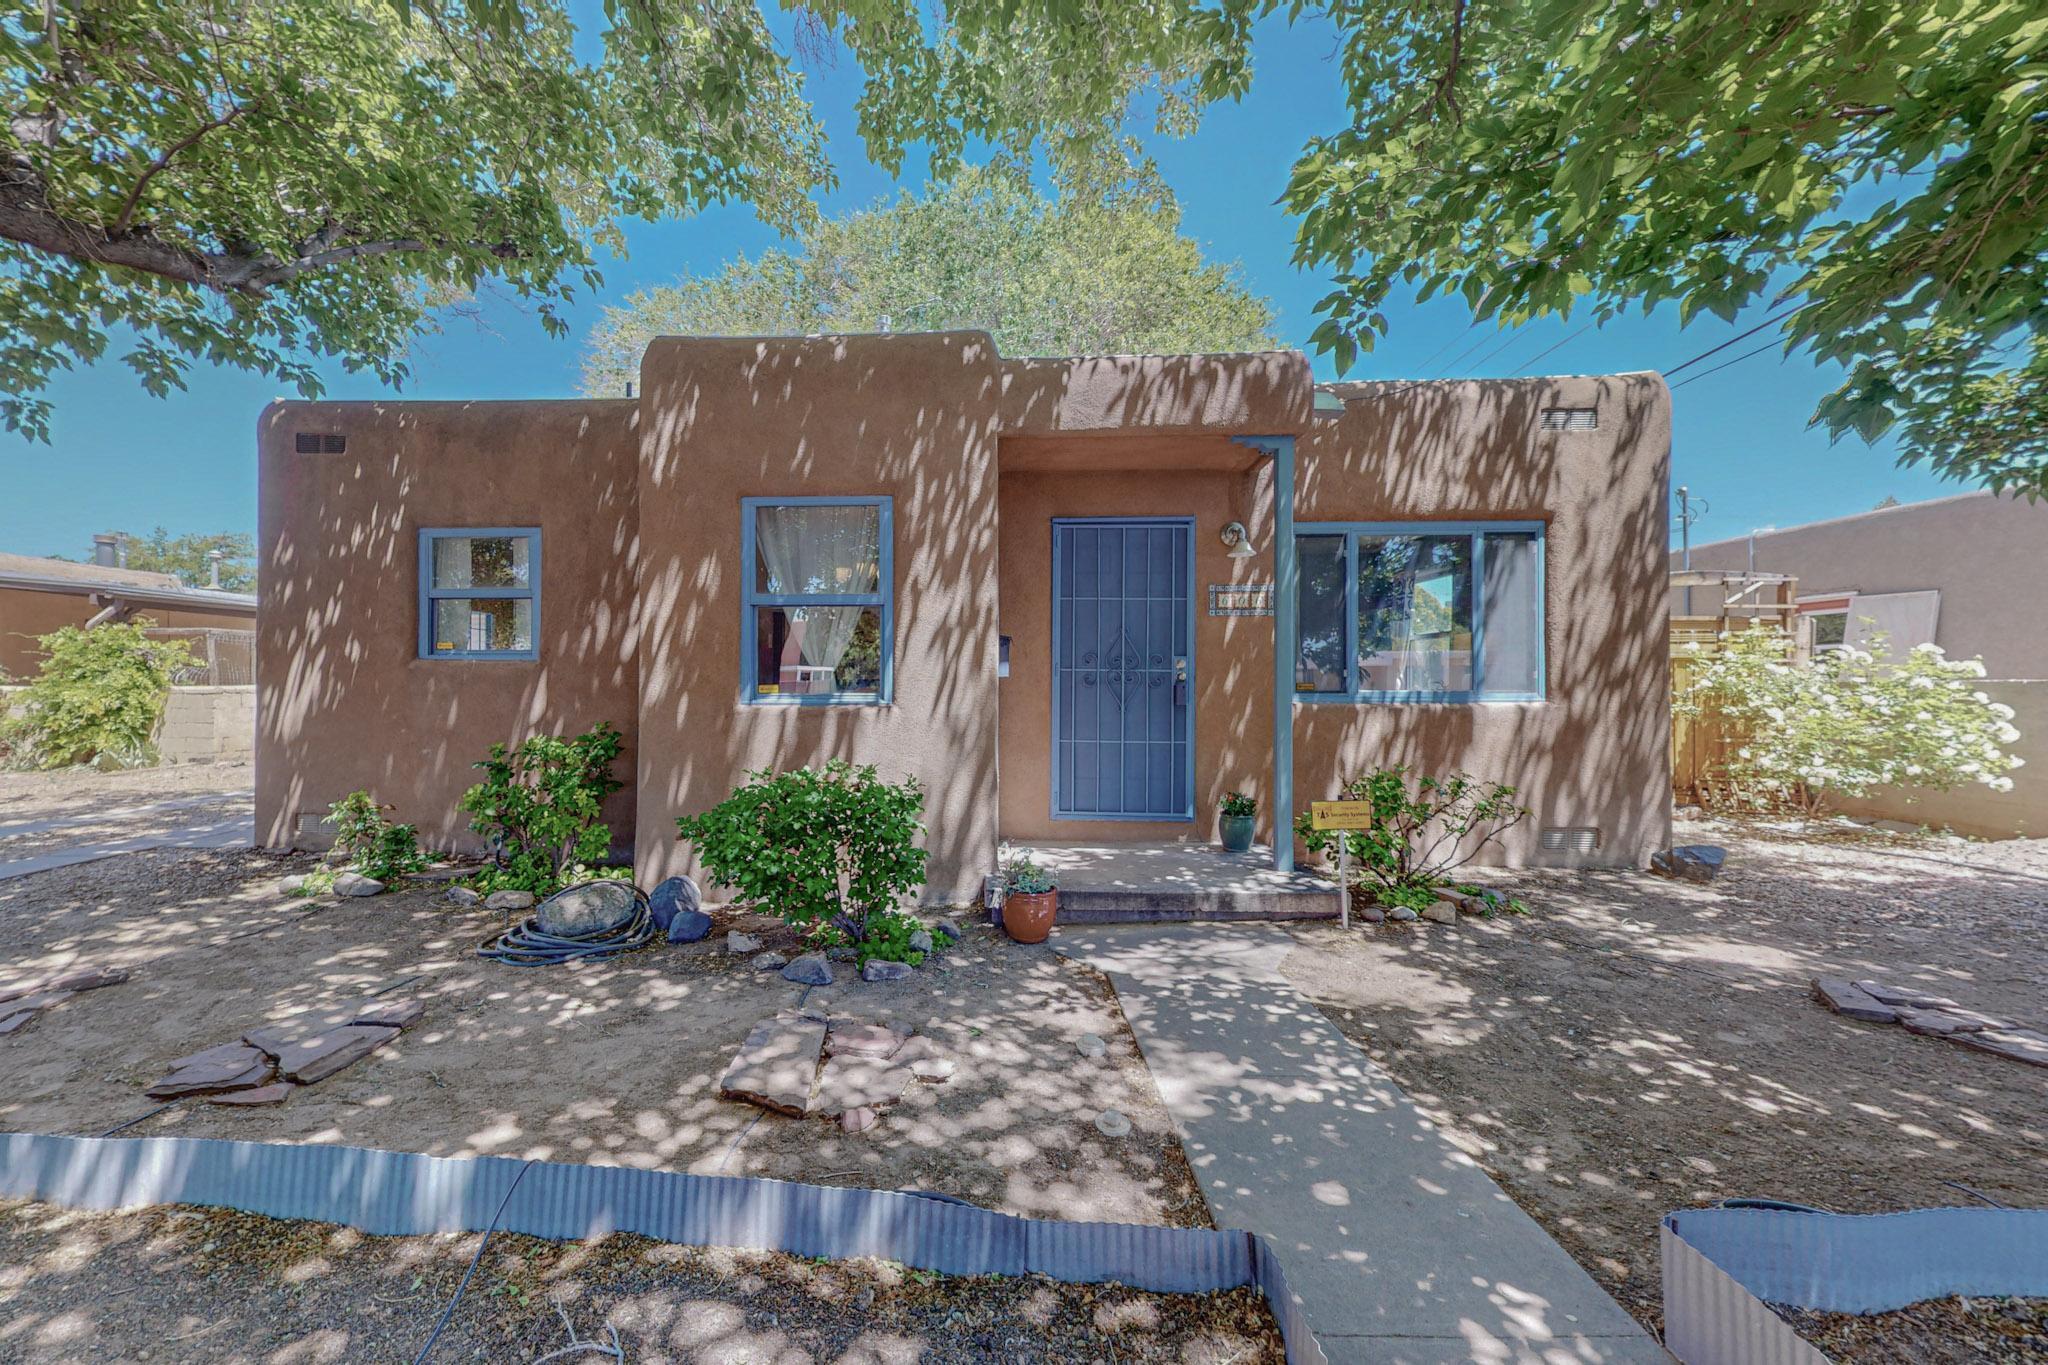 Adorable 2 Bedroom/ 1 Bathroom/ 1 Car Garage, 819 SF home in Parkland Hills, adjacent to Nob Hill, easy access to Downtown/Uptown/Airport/Kirtland AFB/Sandia Labs/UNM. Lightly traveled street. Hardwood floors refinished in 2018. The kitchen has lots of cabinet space, built in microwave, dishwasher and gas stove; the kitchen lighting and appliances were updated in 2017. A master cool evaporative cooling system, garage door and washer/dryer were replaced in 2018. New water line 2019, 200-amp electric 2018. A TPO roof installed 2024! The property was landscaped and beautiful gates installed in 2018, and an irrigation system set up in 2019 that has four zones. Relax in thie beautiful backyard on the shady west side of the home and enjoy the lovely flower garden and Fruit Trees!